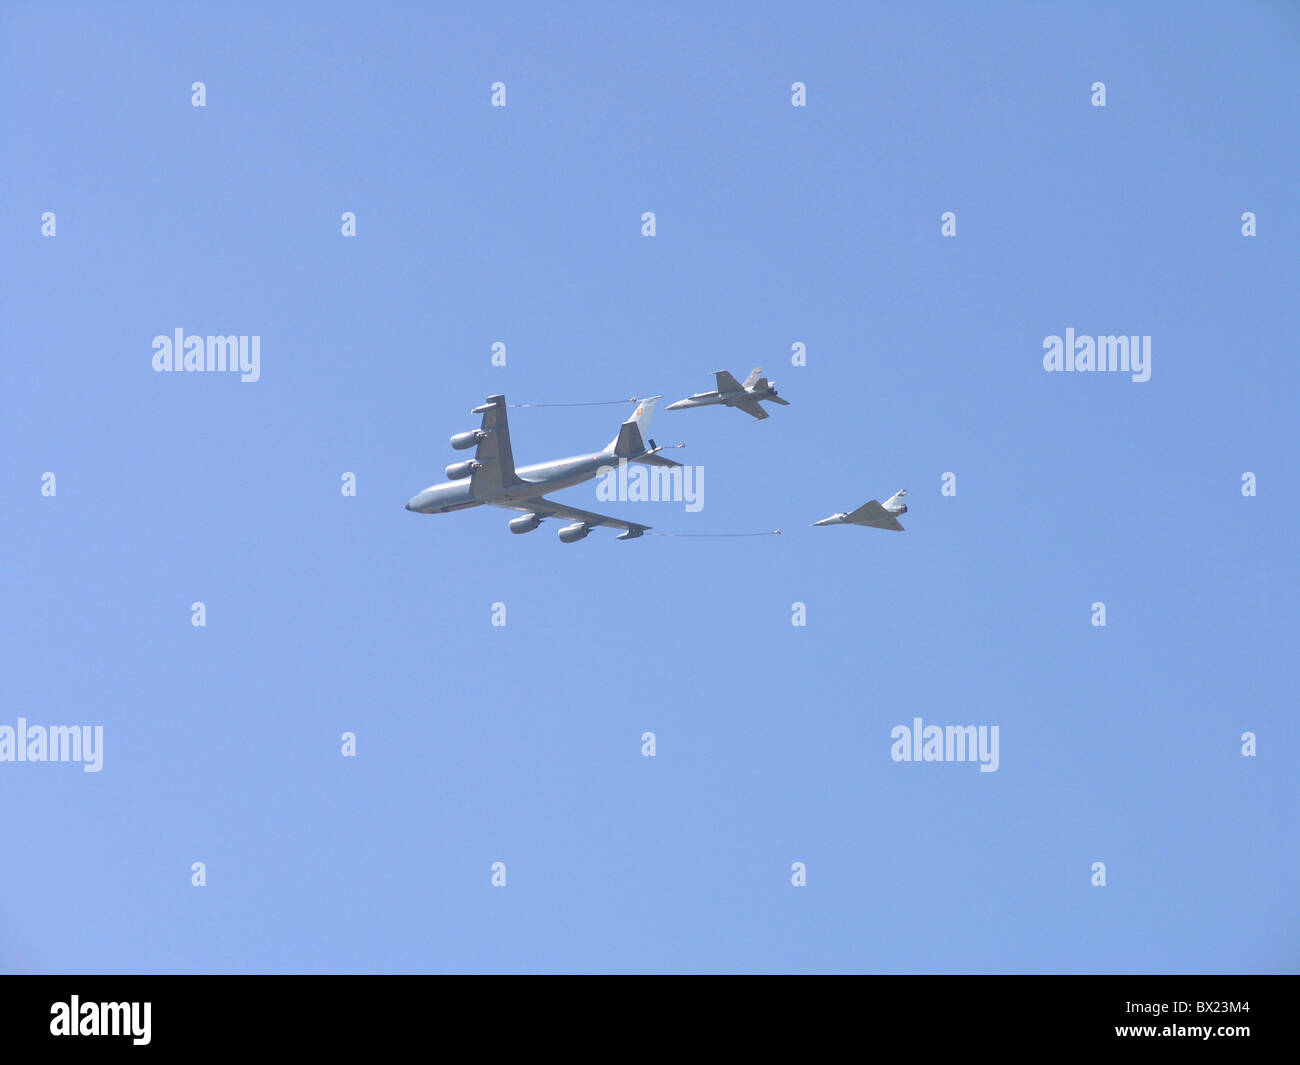 Air 04 Air to air airplane airplanes Airshow fill up flight show Payerne refueller refuelling Switzerland Stock Photo